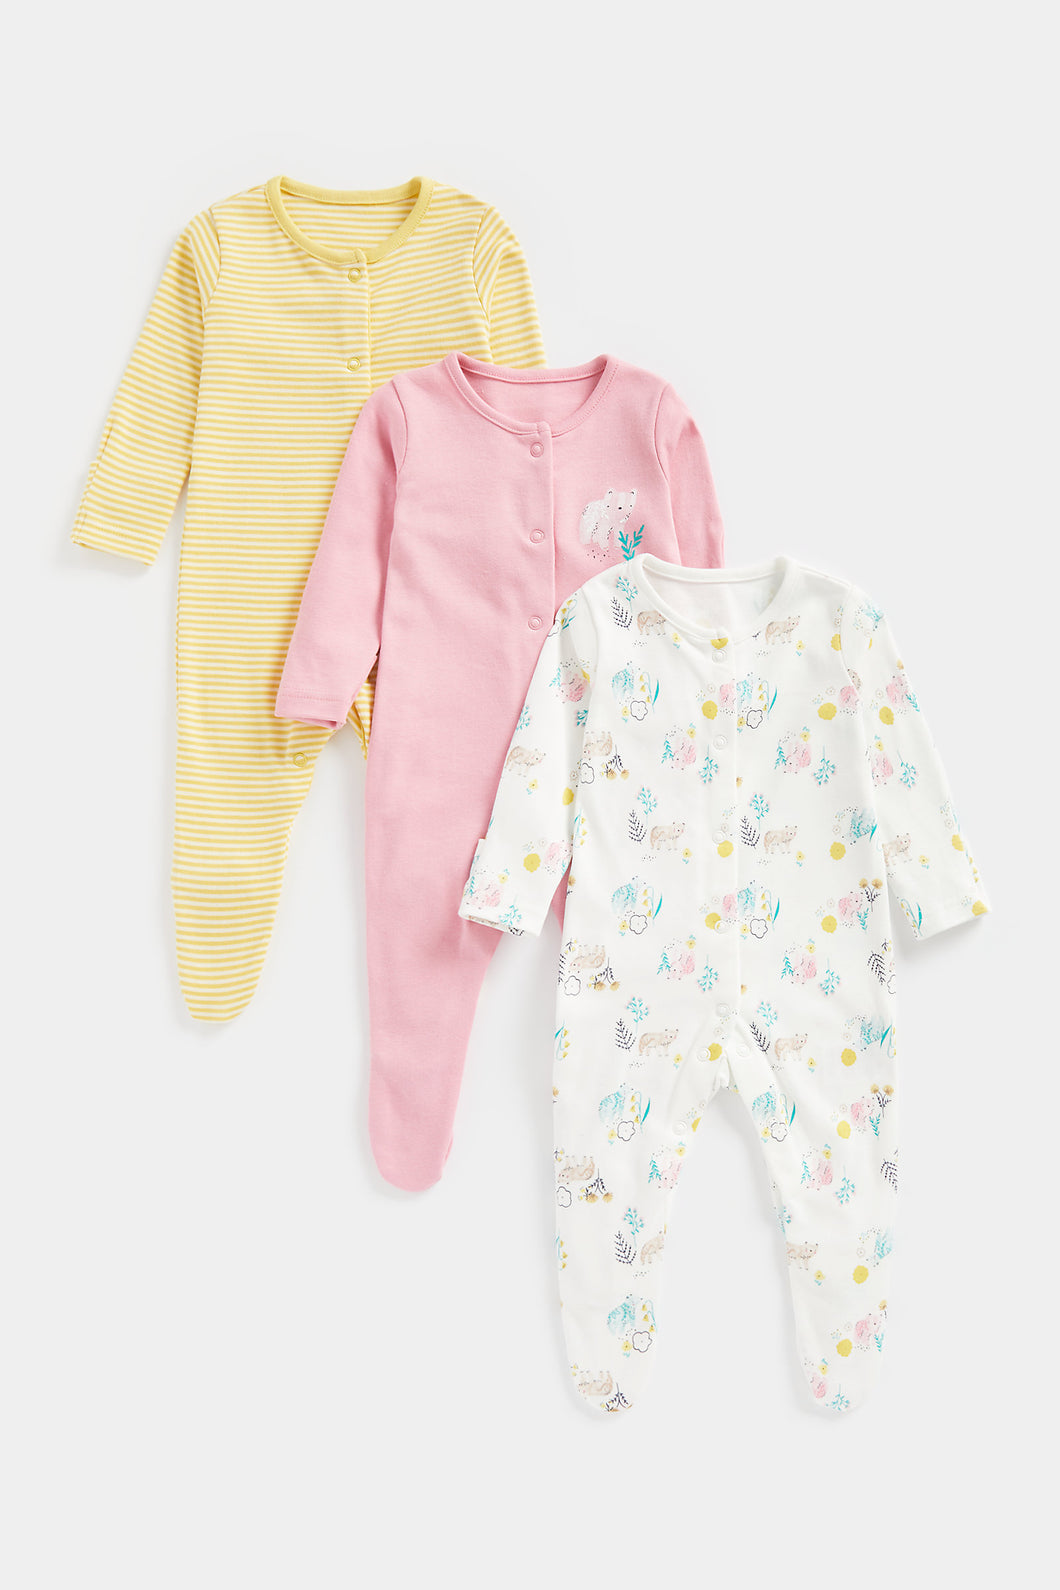 Mothercare Icy Bear Sleepsuits - 3 Pack